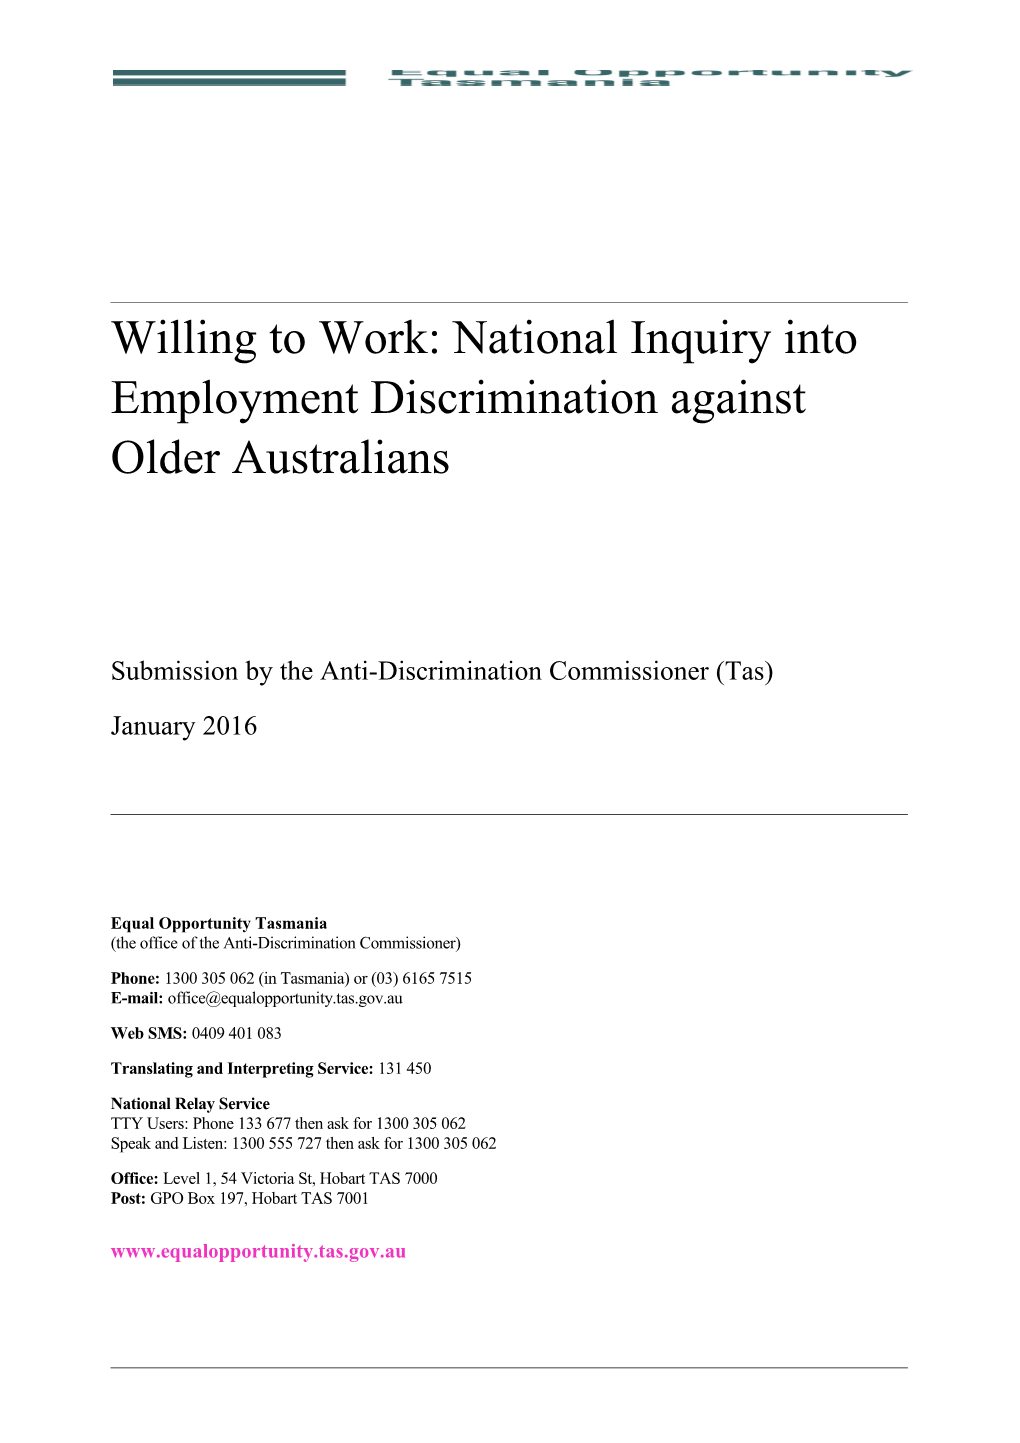 Willing to Work: National Inquiry Into Employment Discrimination Against Older Australians s8